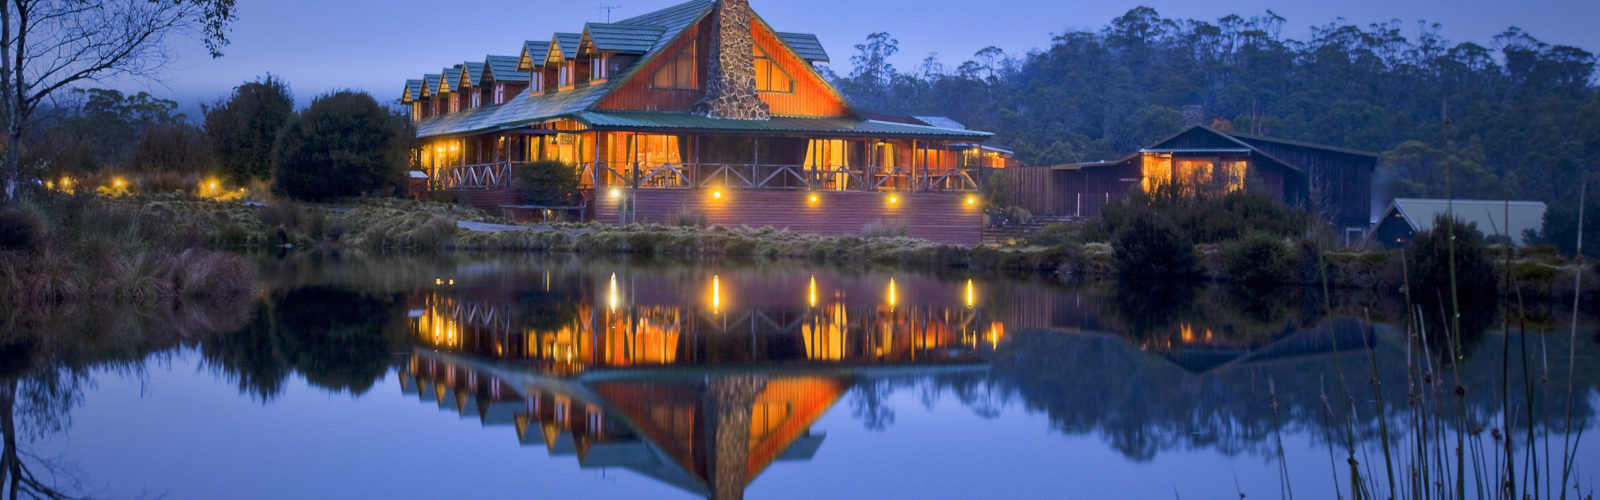 peppers-cradle-mountain-cabin-night